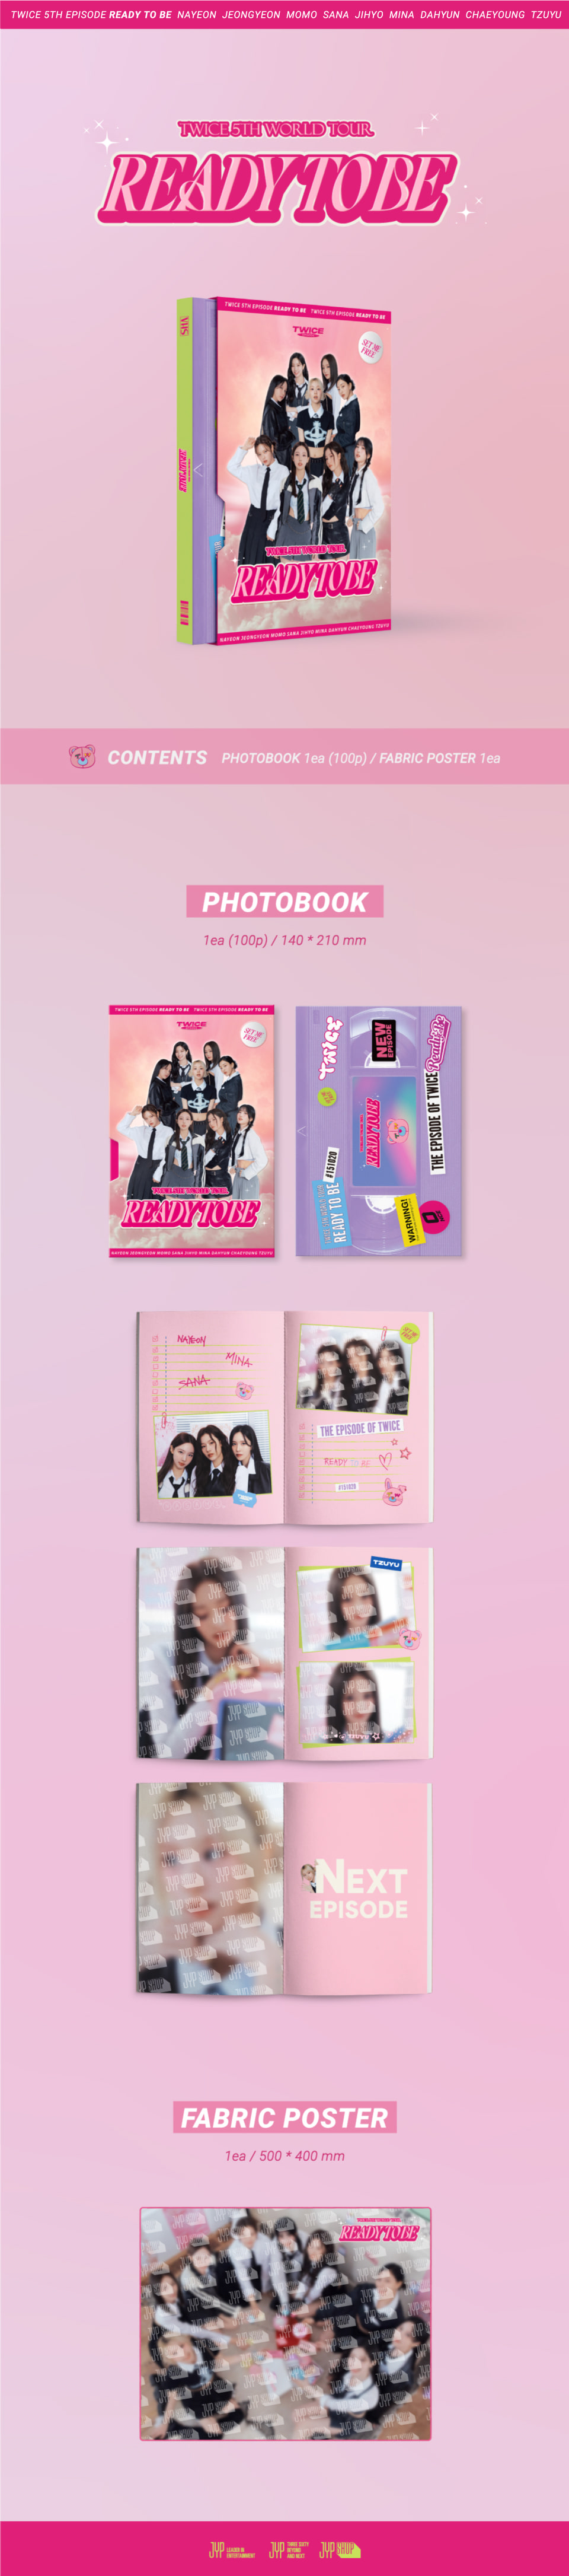 TWICE Merch from Their “4th World Tour III” Is Now Available Online for a  Limited Time